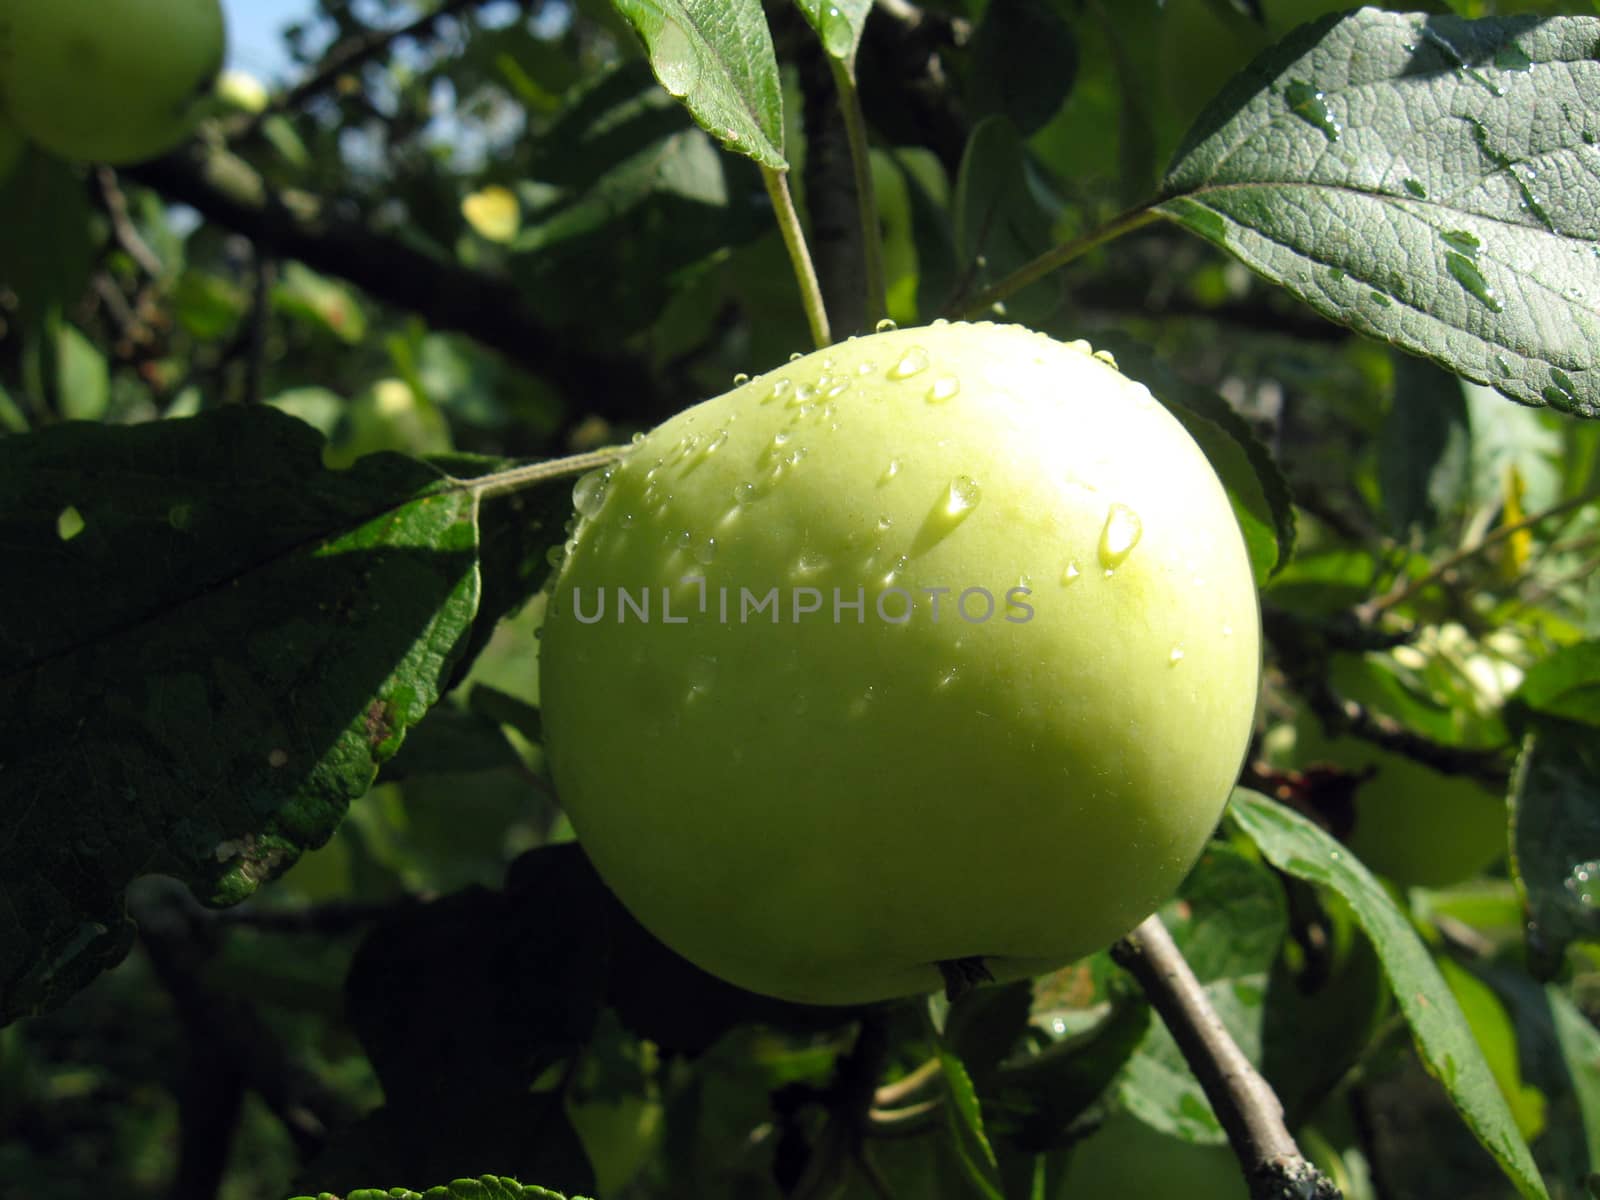 very tasty and ripe apple hanging on the tree